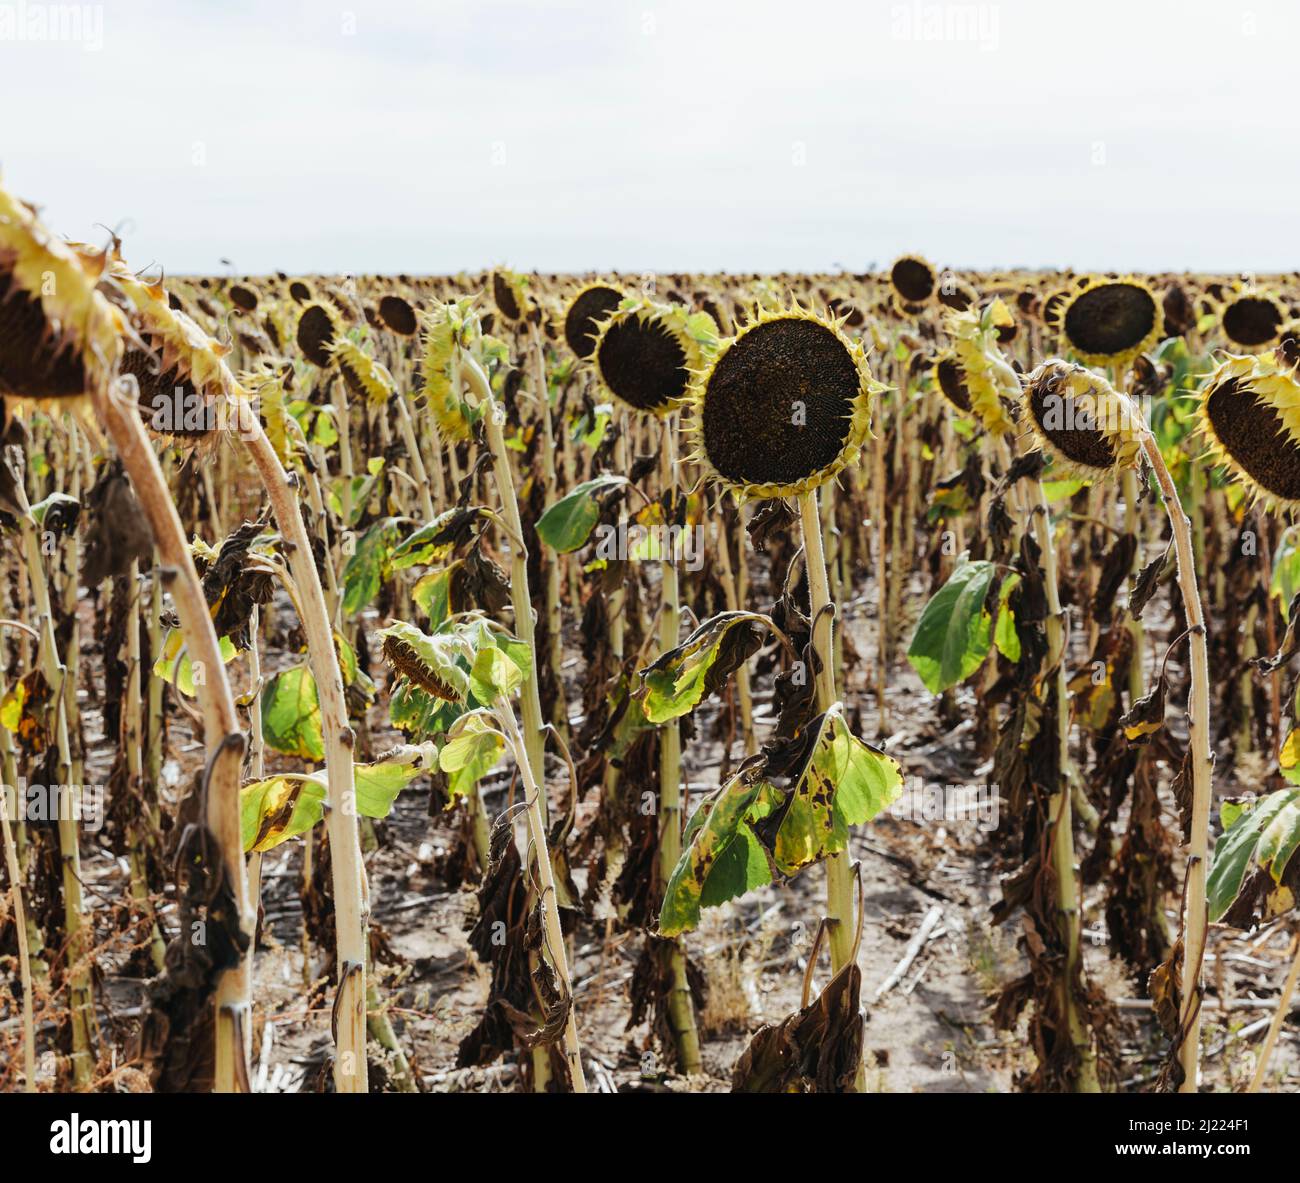 A field of sunflower plants, their heavy heads ripe with seed. Stock Photo